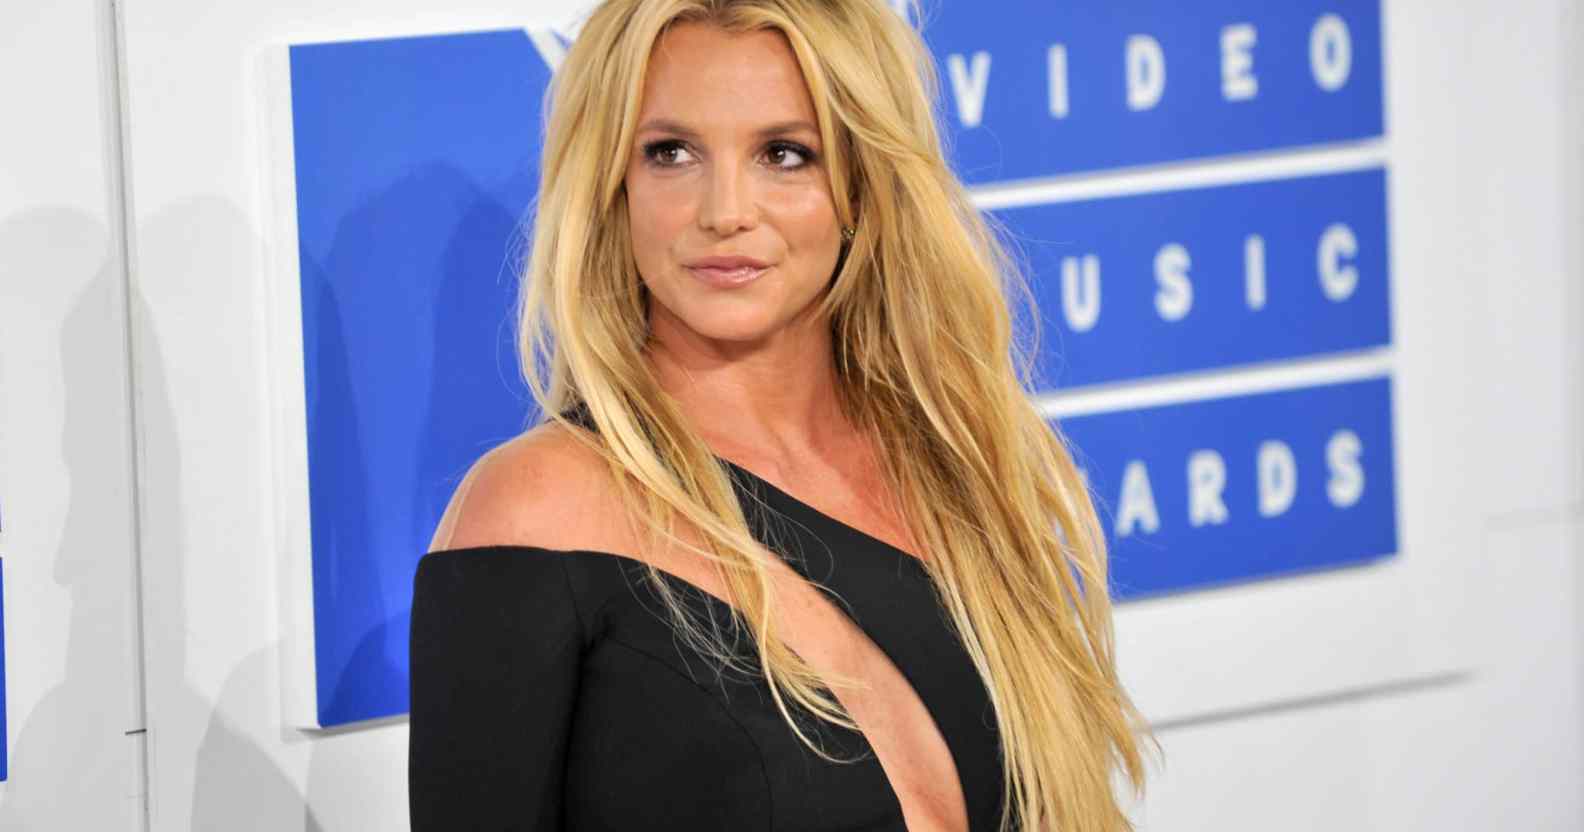 Britney Spears turns to the right in a black dress